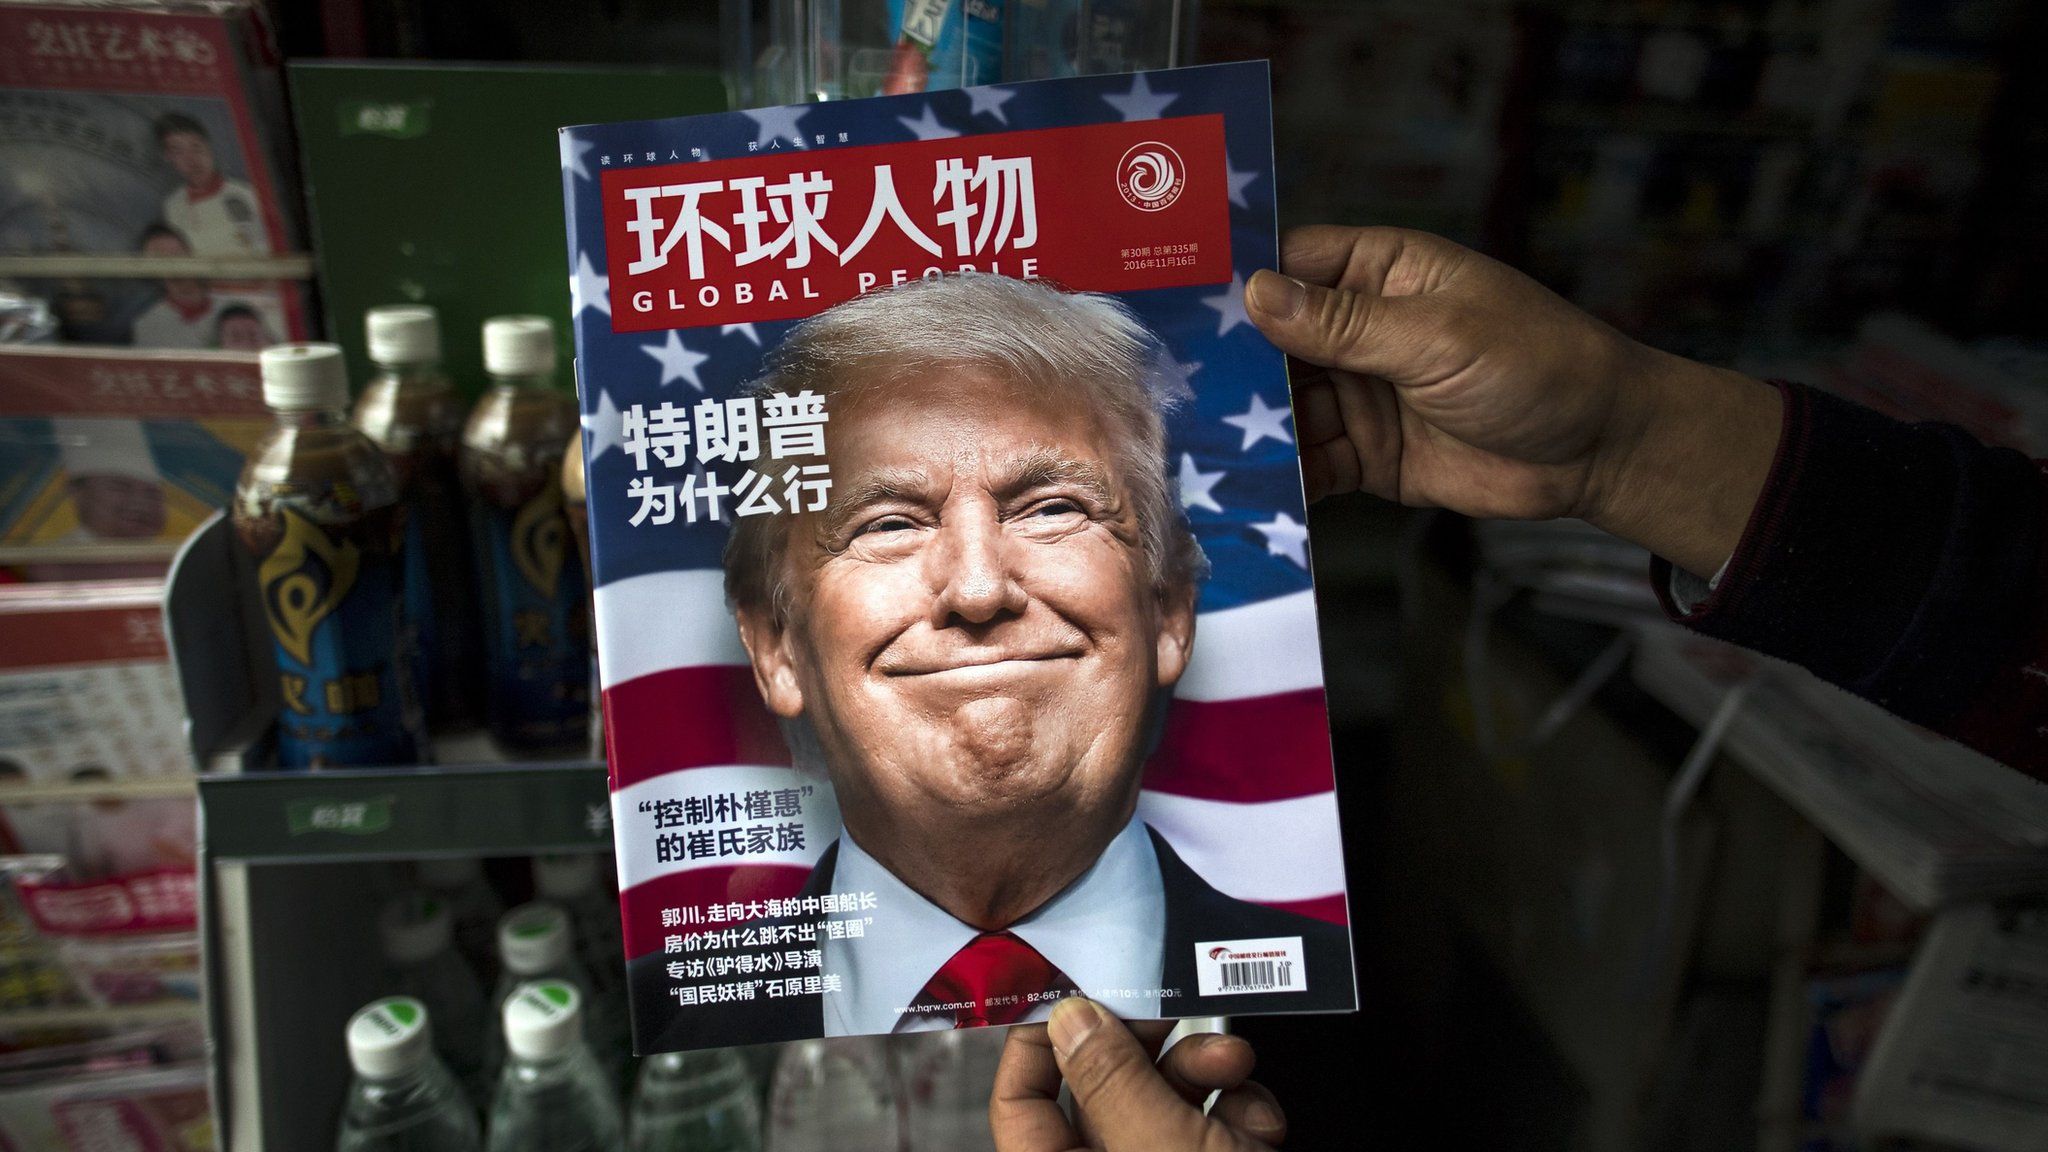 A copy of the local Chinese magazine Global People with a cover story that translates to "Why did Trump win" at a news stand in Shanghai (14 November)